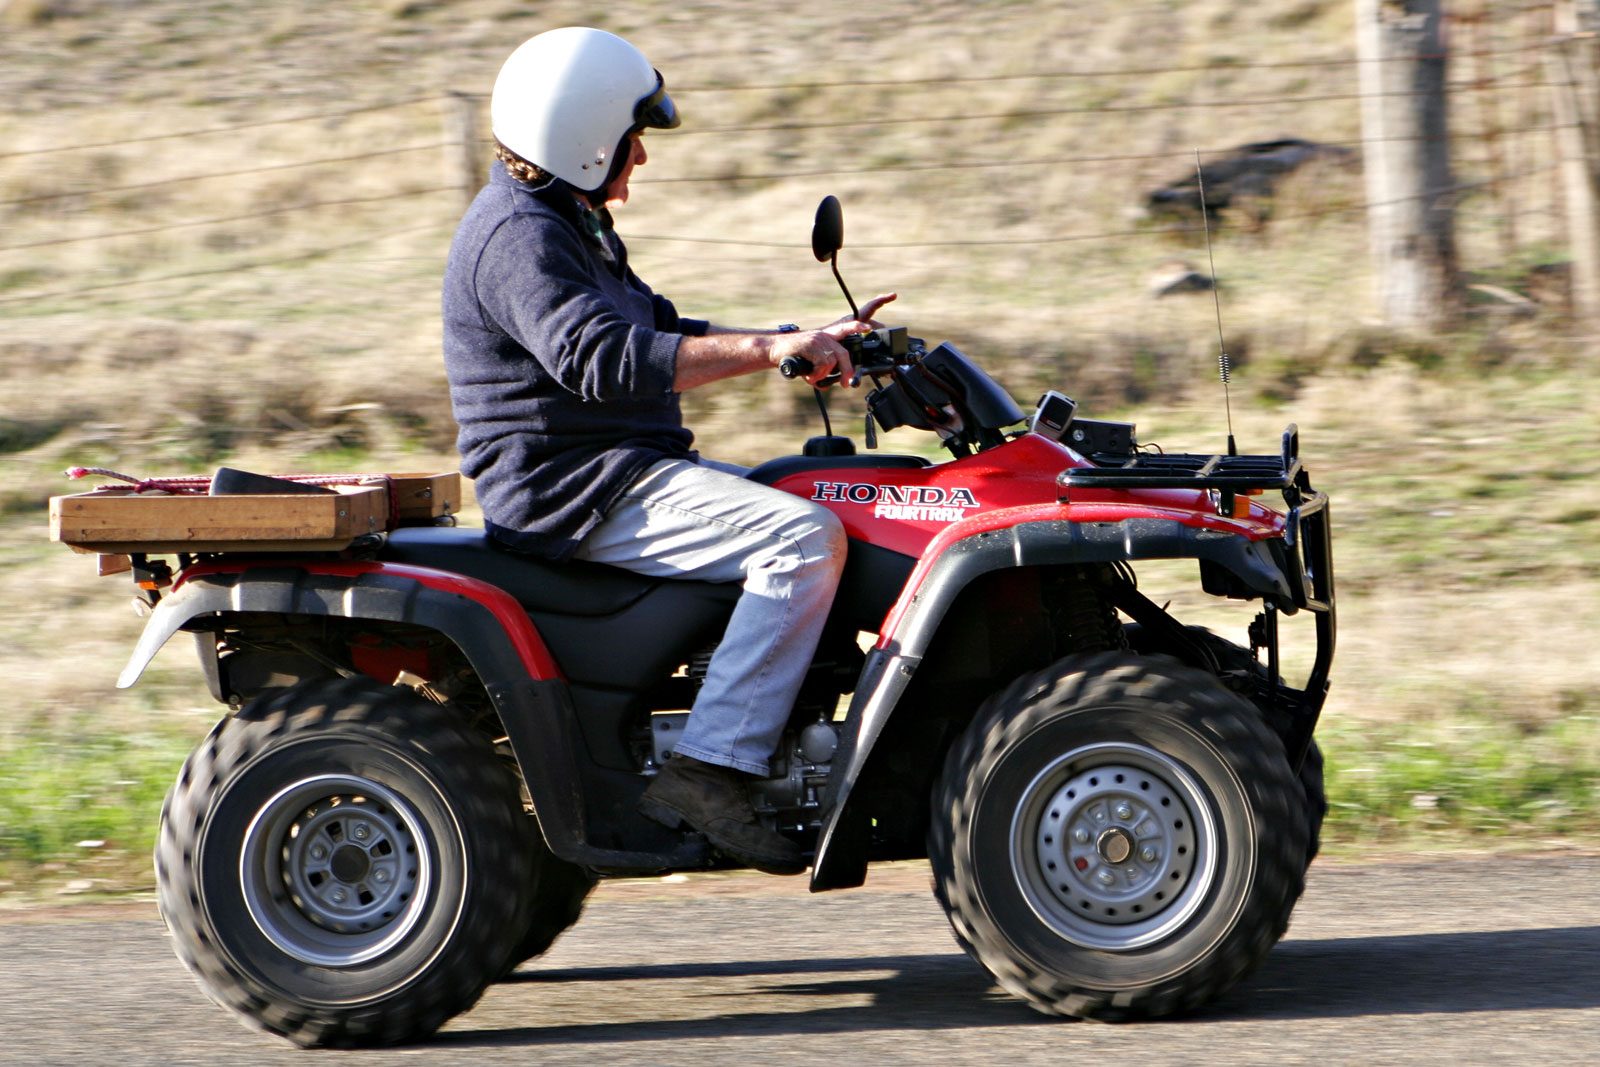 SD and G mulls green light for ATVs sharing roads